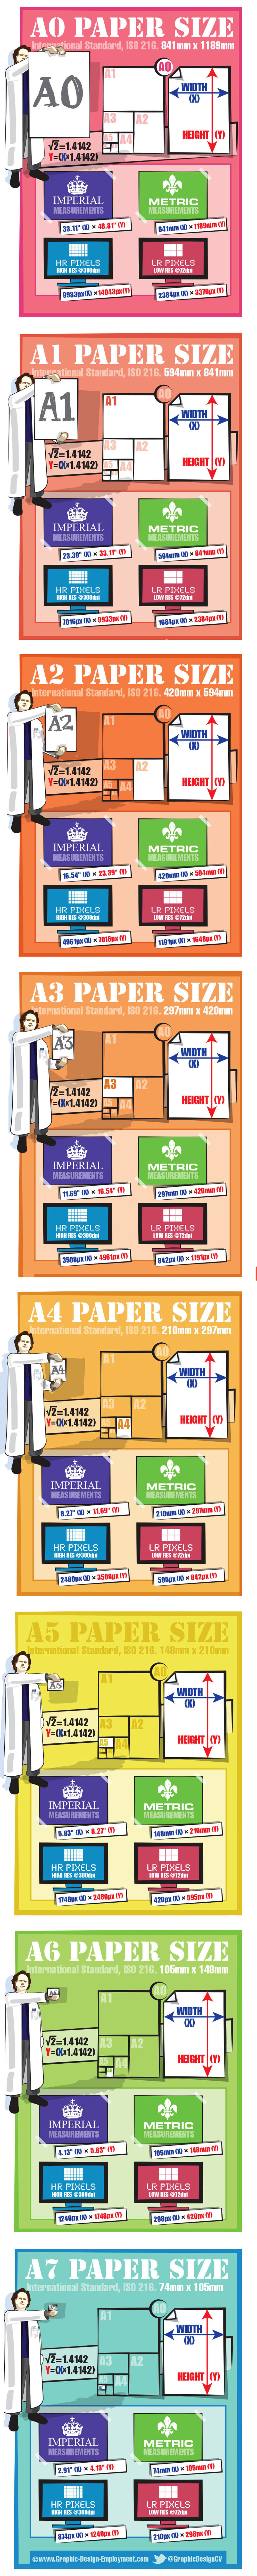 Standard Paper Sizes for Printing Infographic